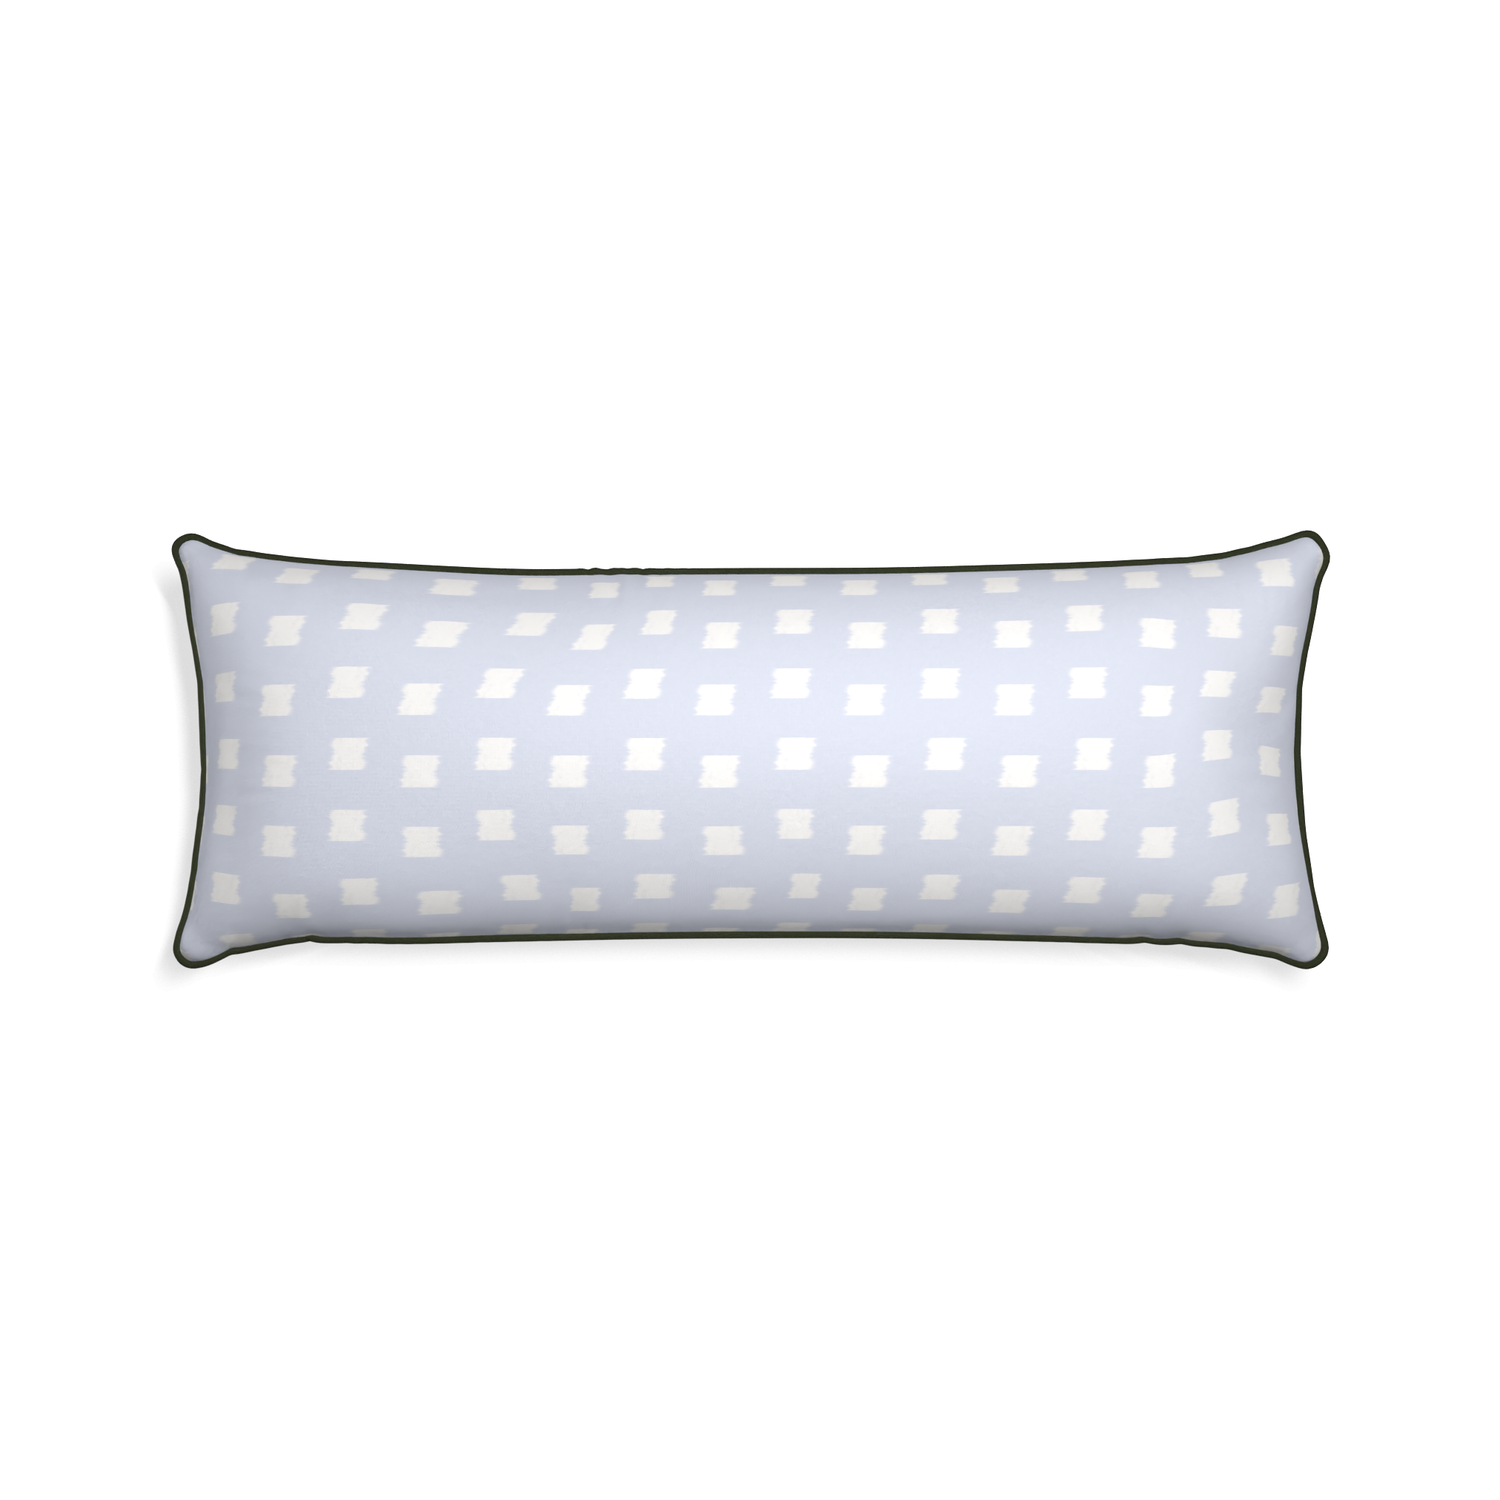 Xl-lumbar denton custom sky blue patternpillow with f piping on white background